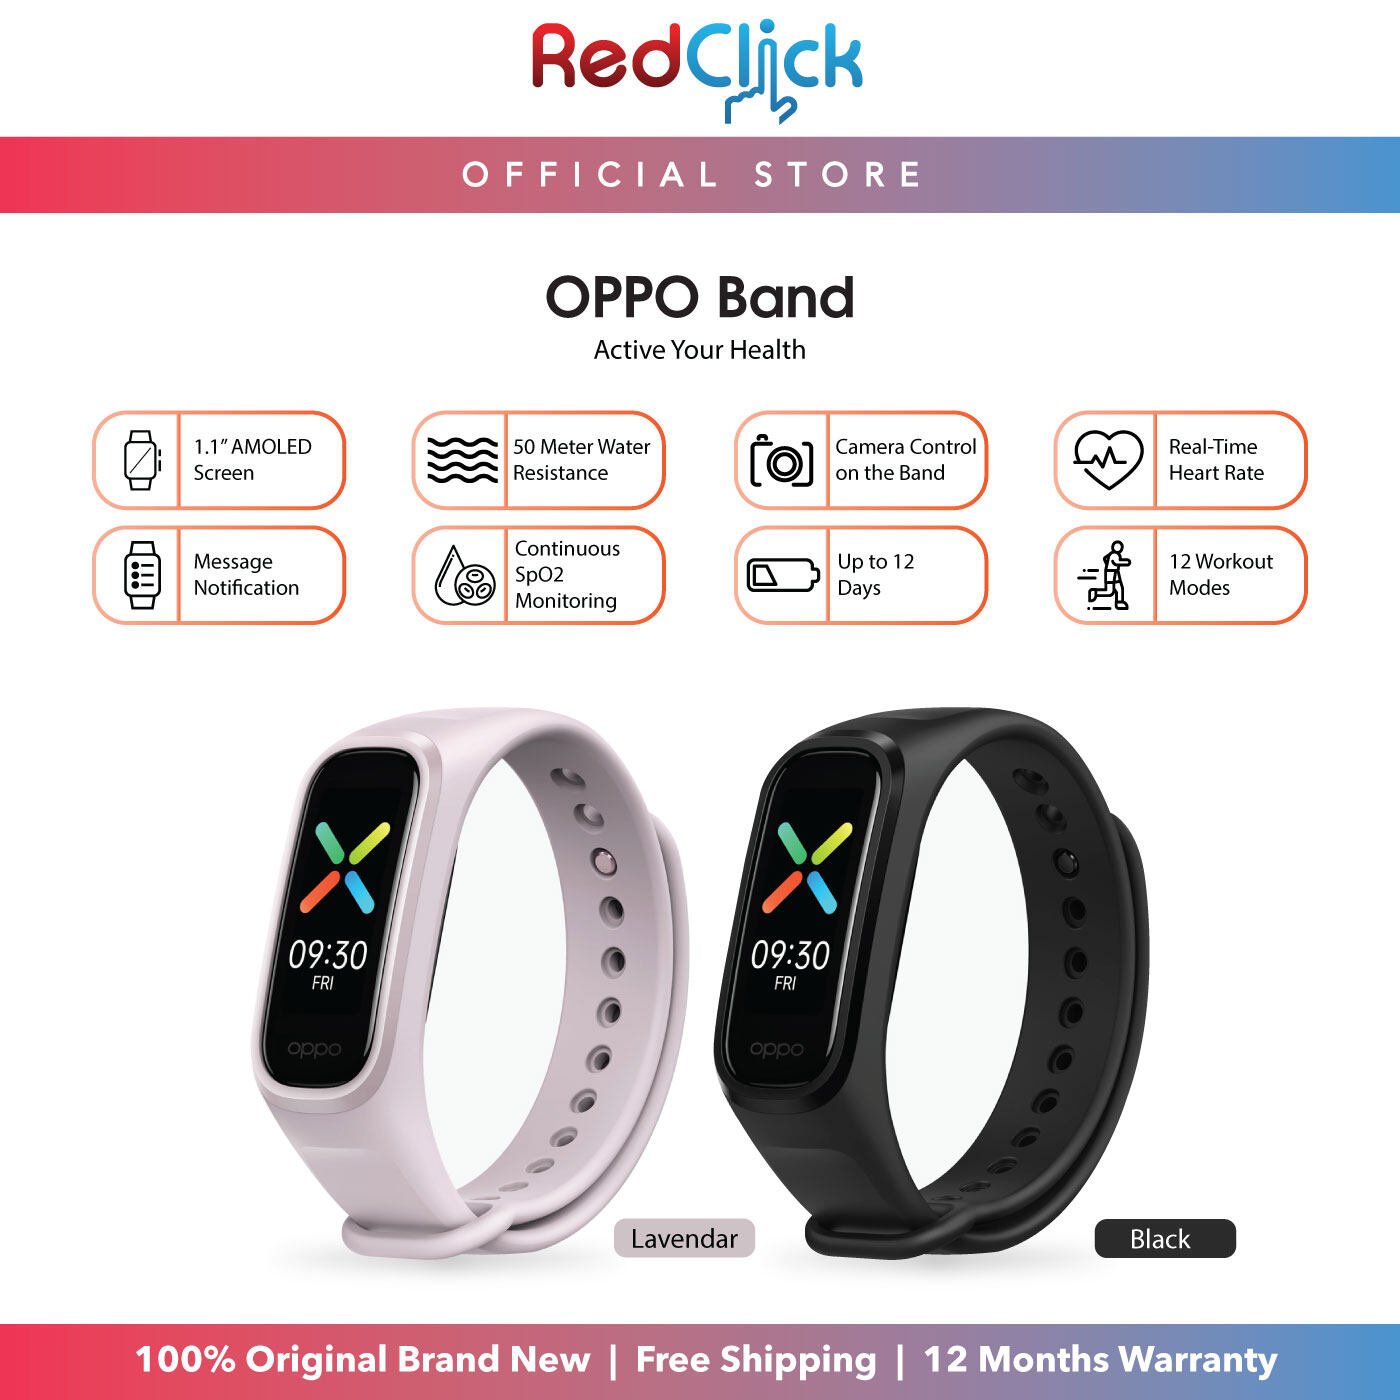 OPPO Band 1.1" AMOLED SpO2 Monitoring Real time Heart Rate Monitoring Fitness Smart Band